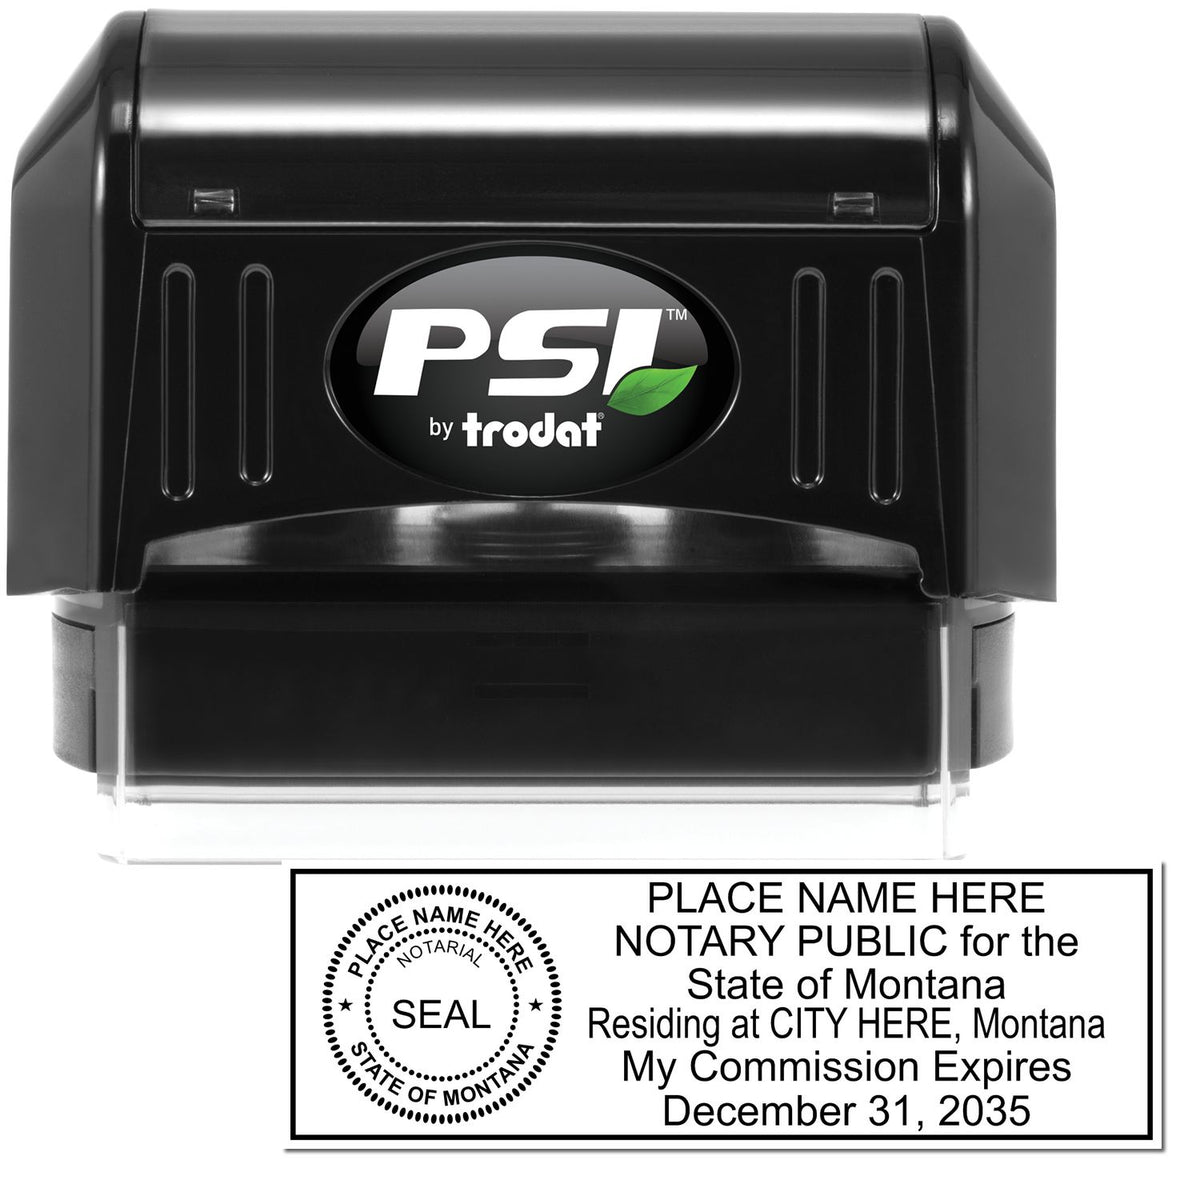 The main image for the PSI Montana Notary Stamp depicting a sample of the imprint and electronic files